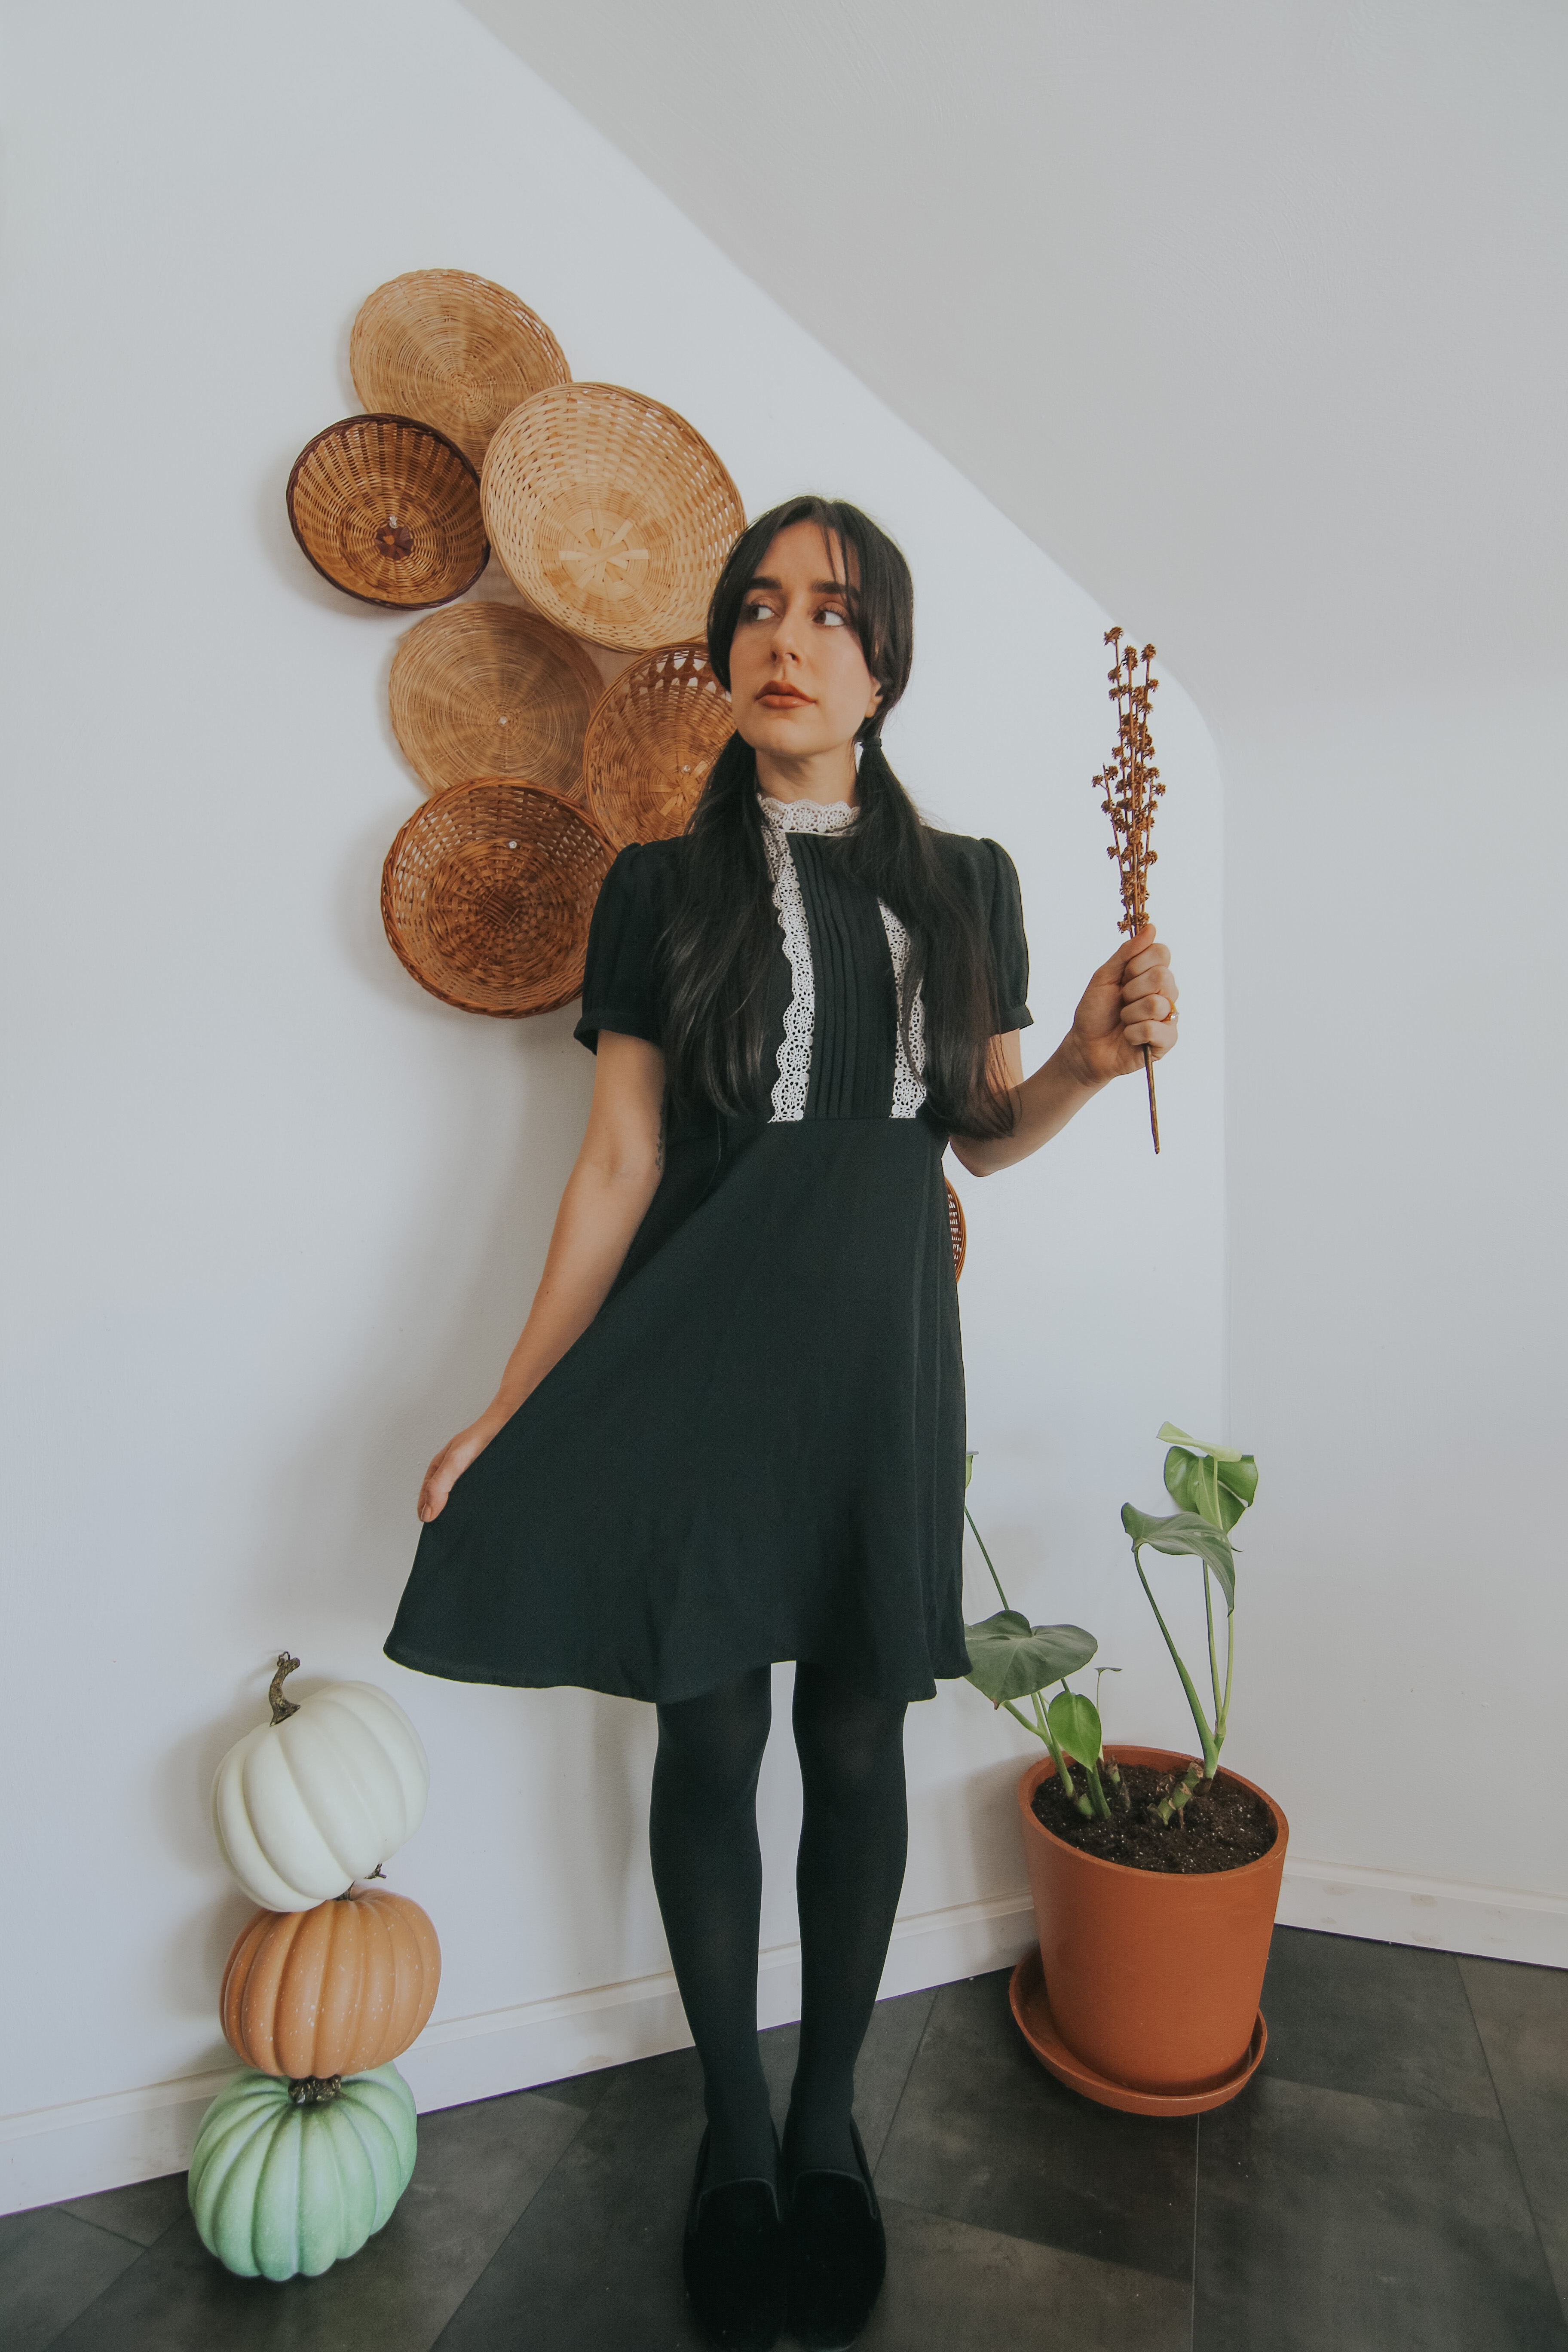 Best Wednesday Addams Halloween costumes to buy in 2023